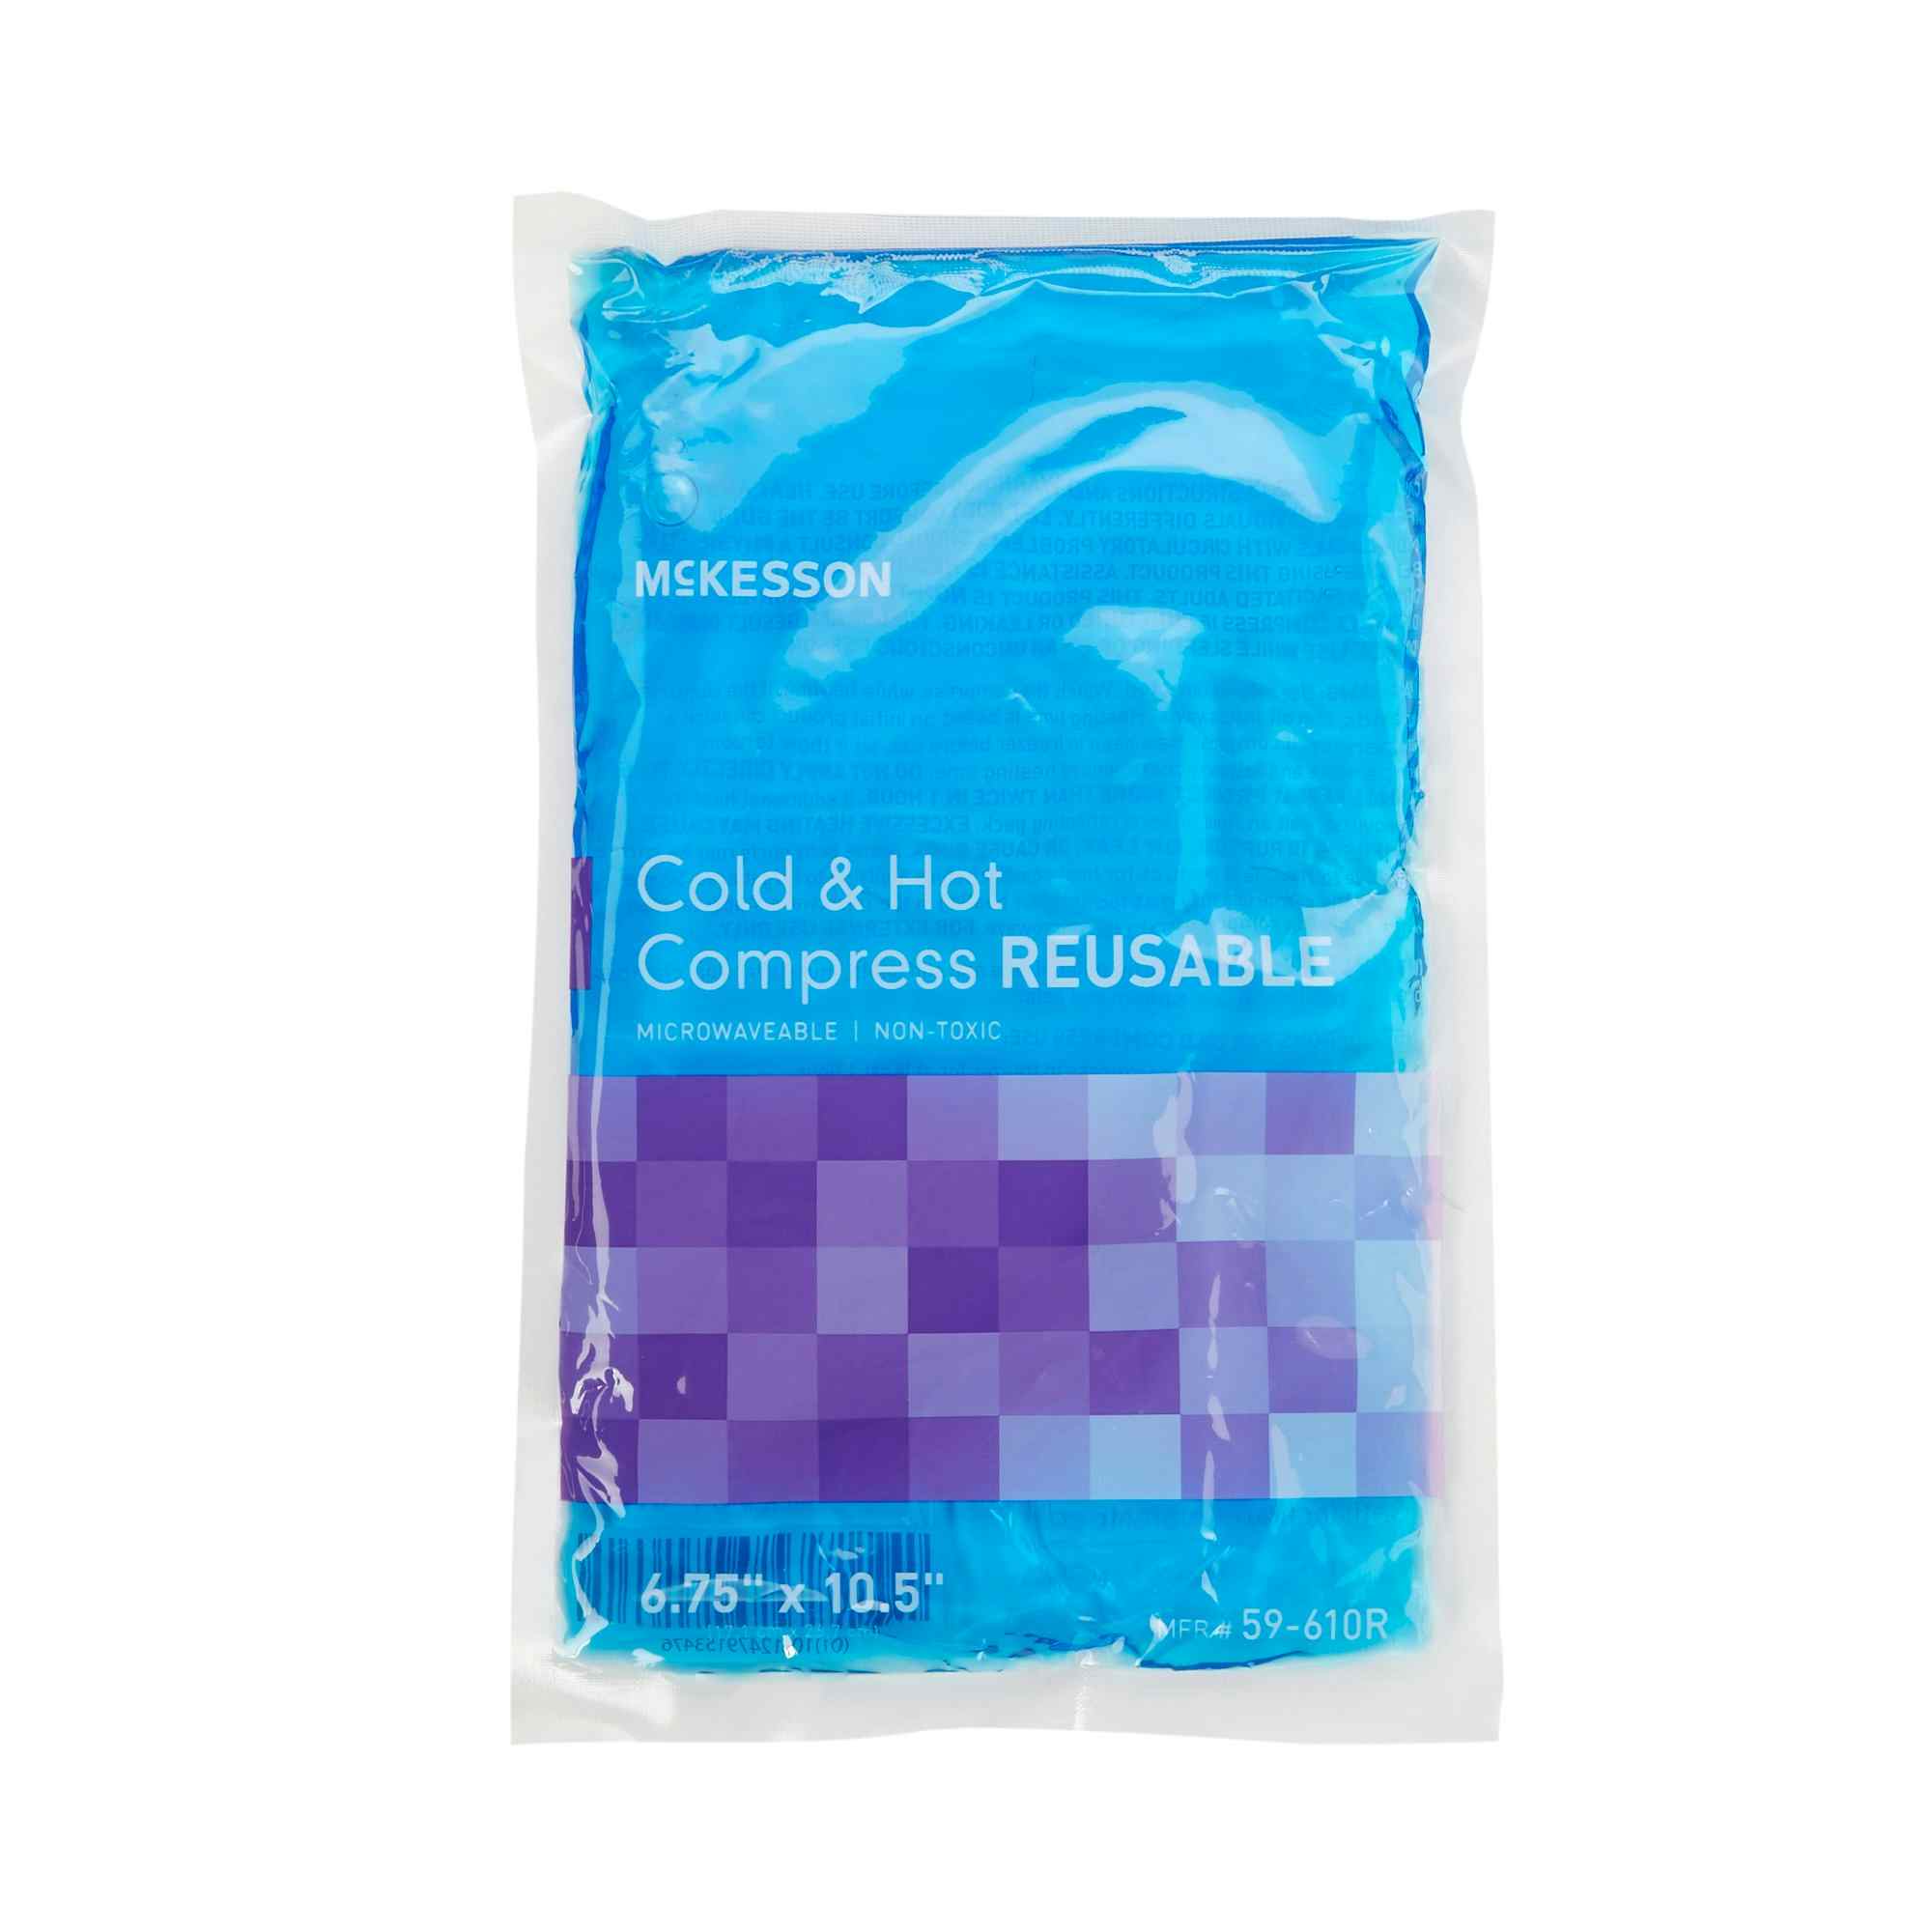 McKesson Cold & Hot Reusable Compress, 59-610R, Large (6.75 X 10.5") - Case of 24